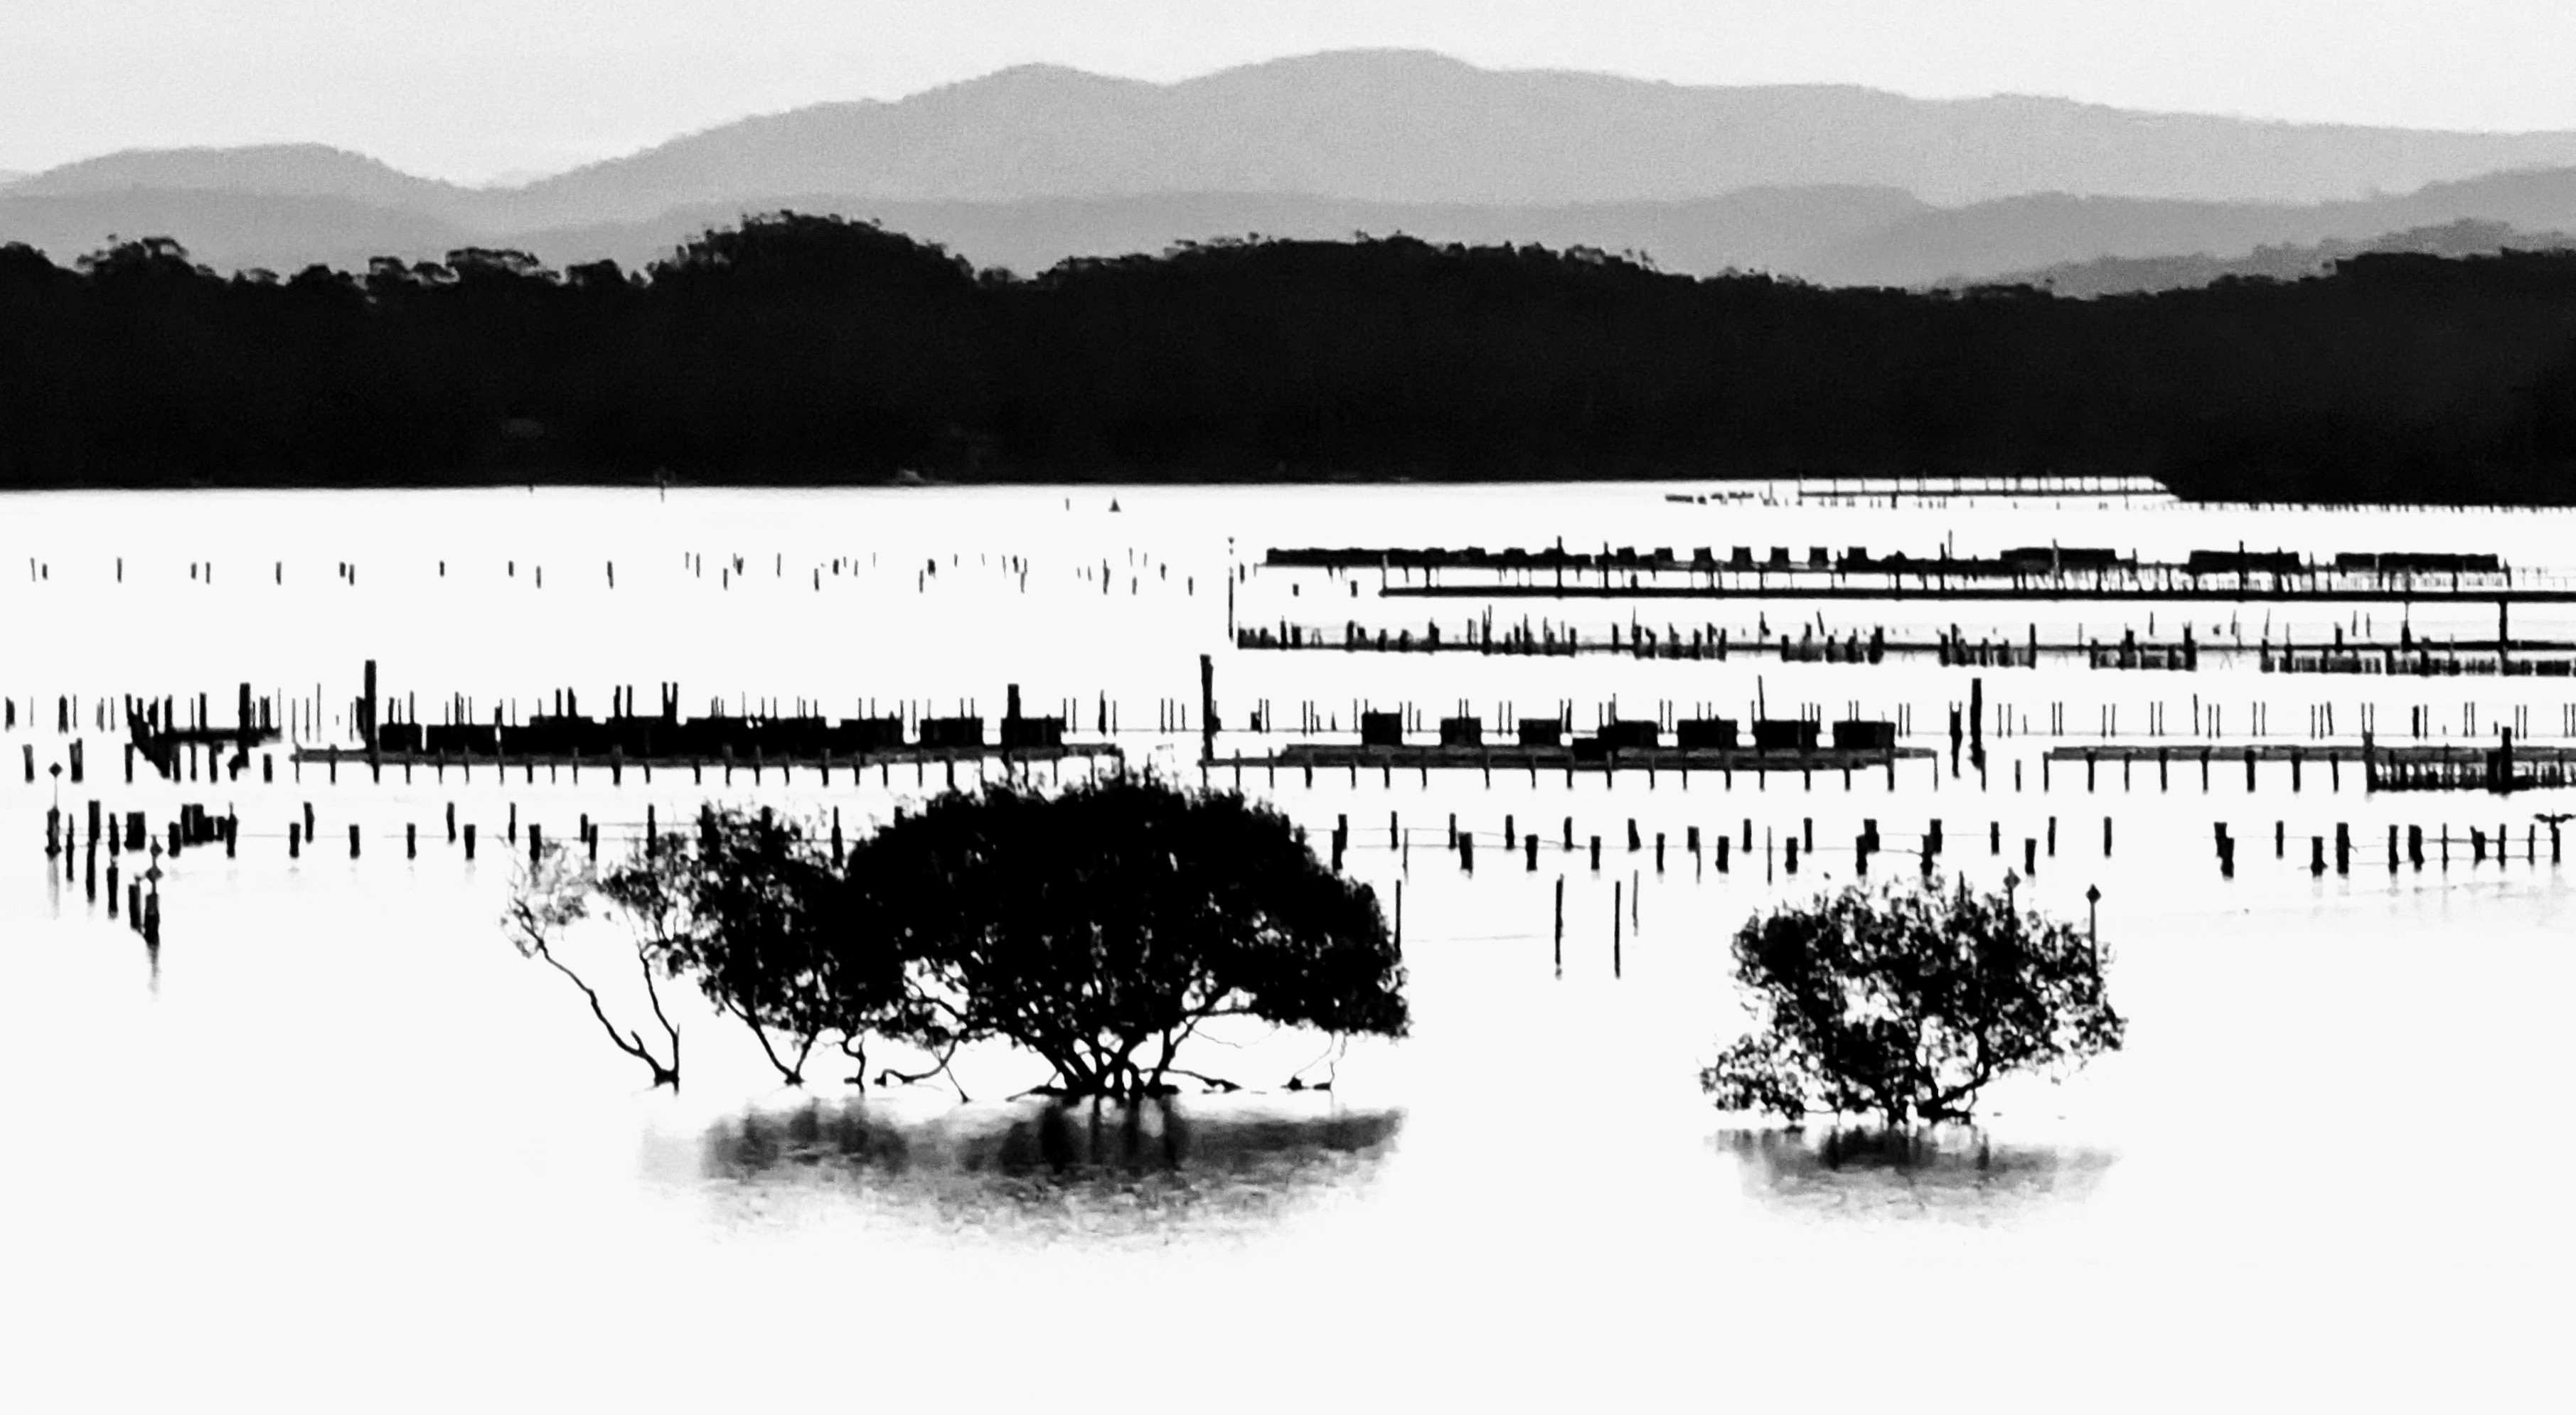 Monochrome photograph of a tidal lake with trees, oyster farm, and distant aerial hills